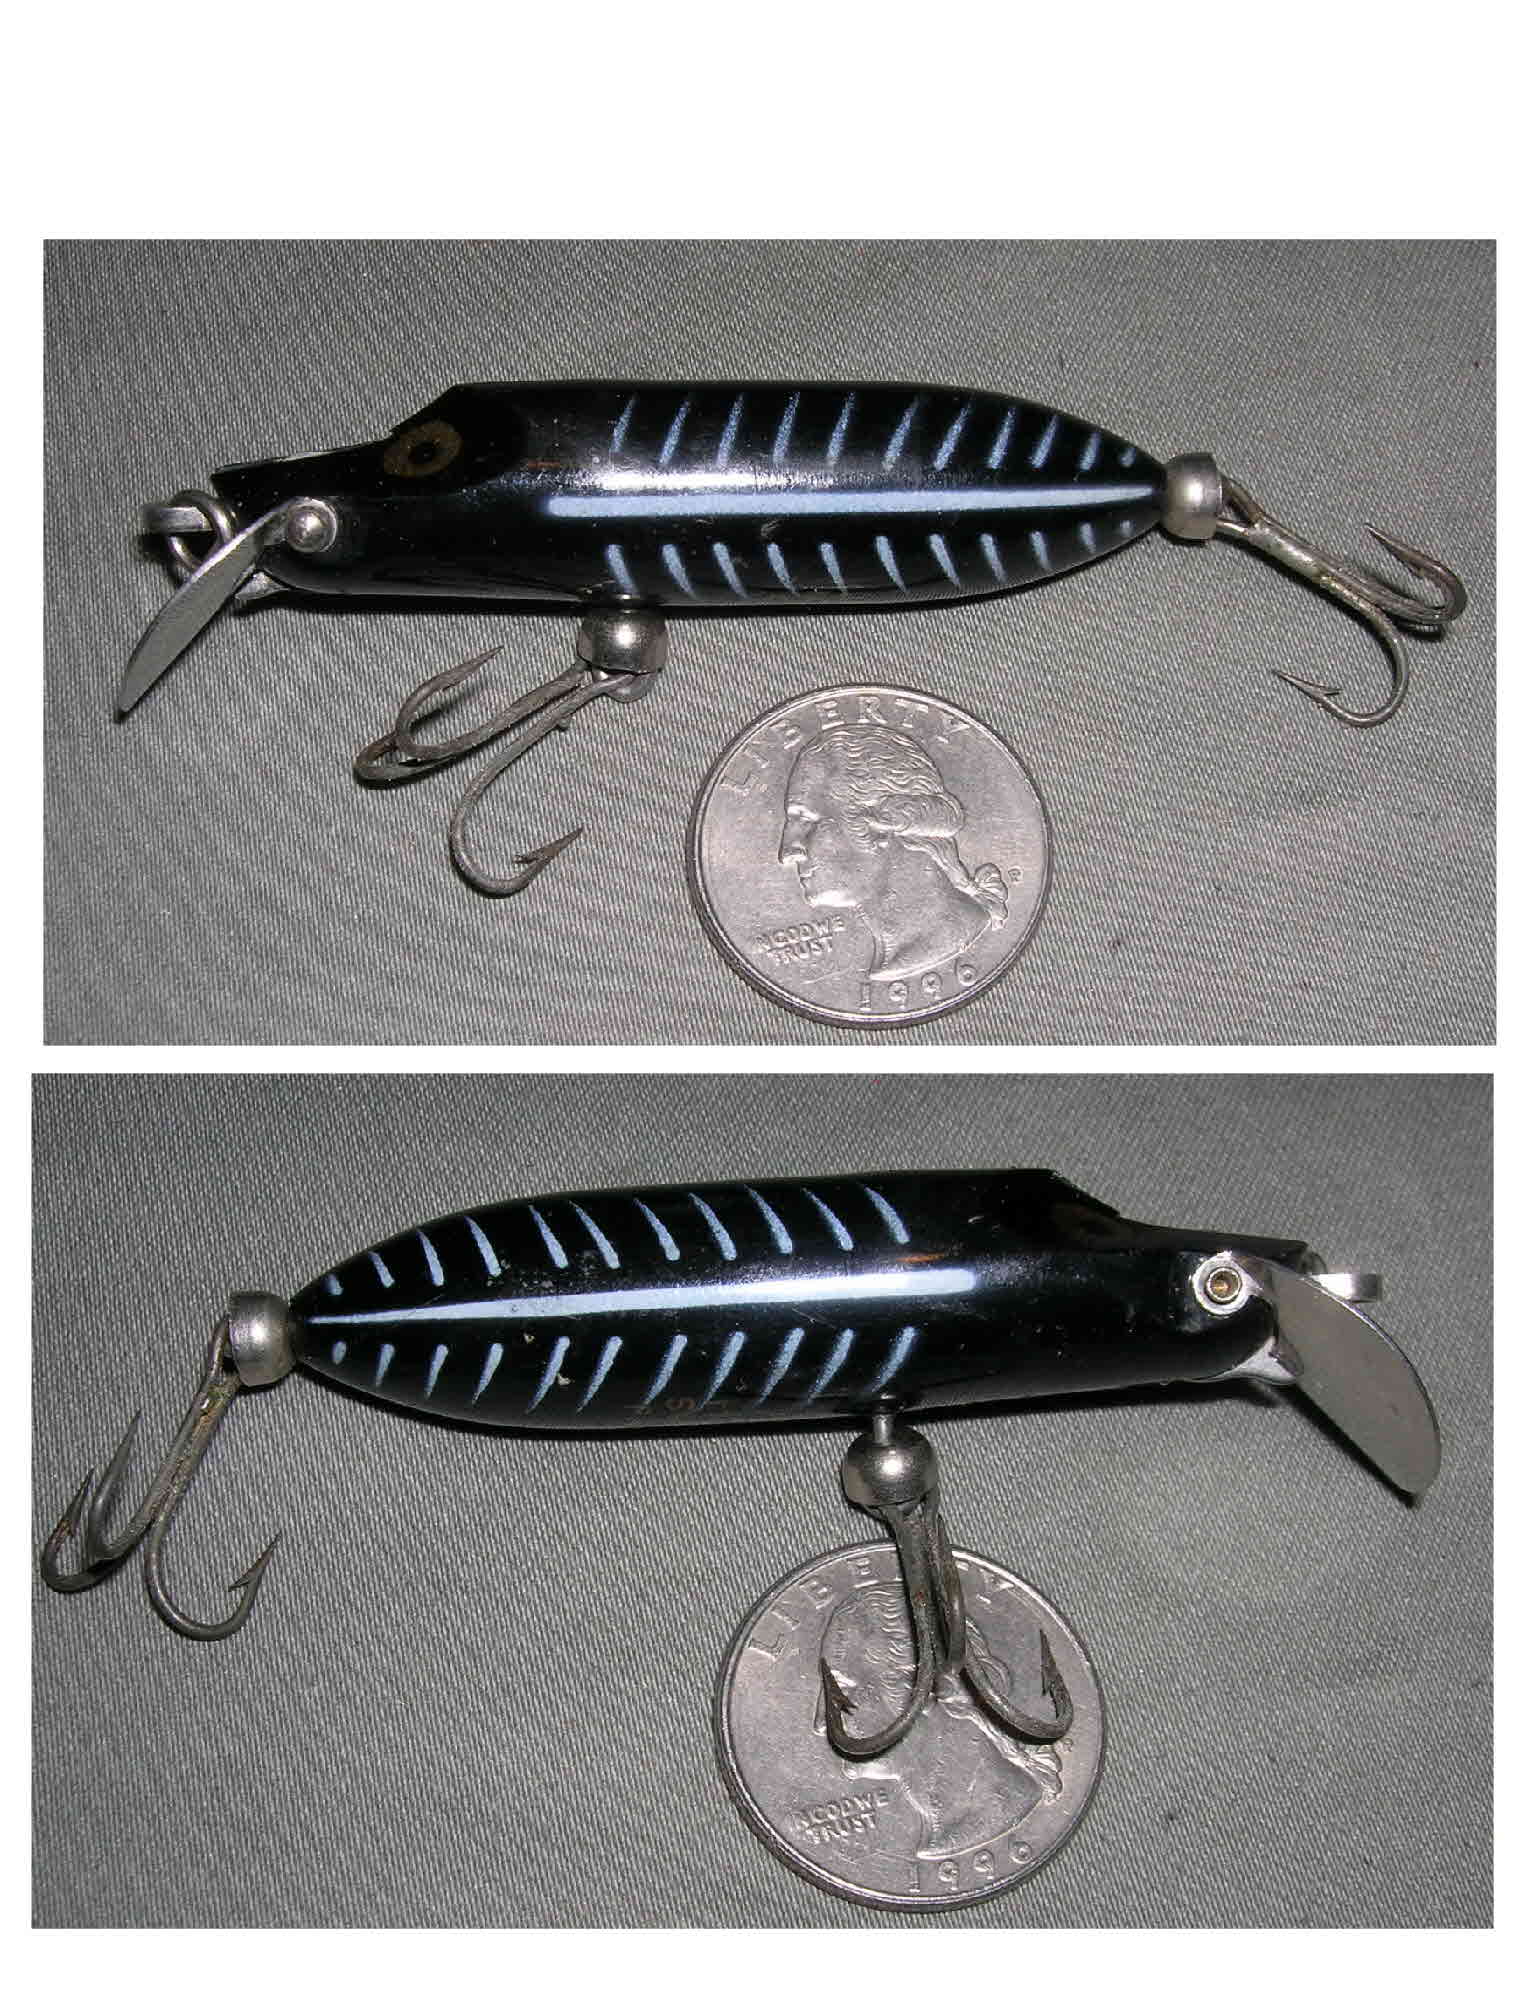 Old Dominion Lures 4 1/2 Sneaky Bird Lure w/Plastic Eyes, C. 1970's,  Unfished!